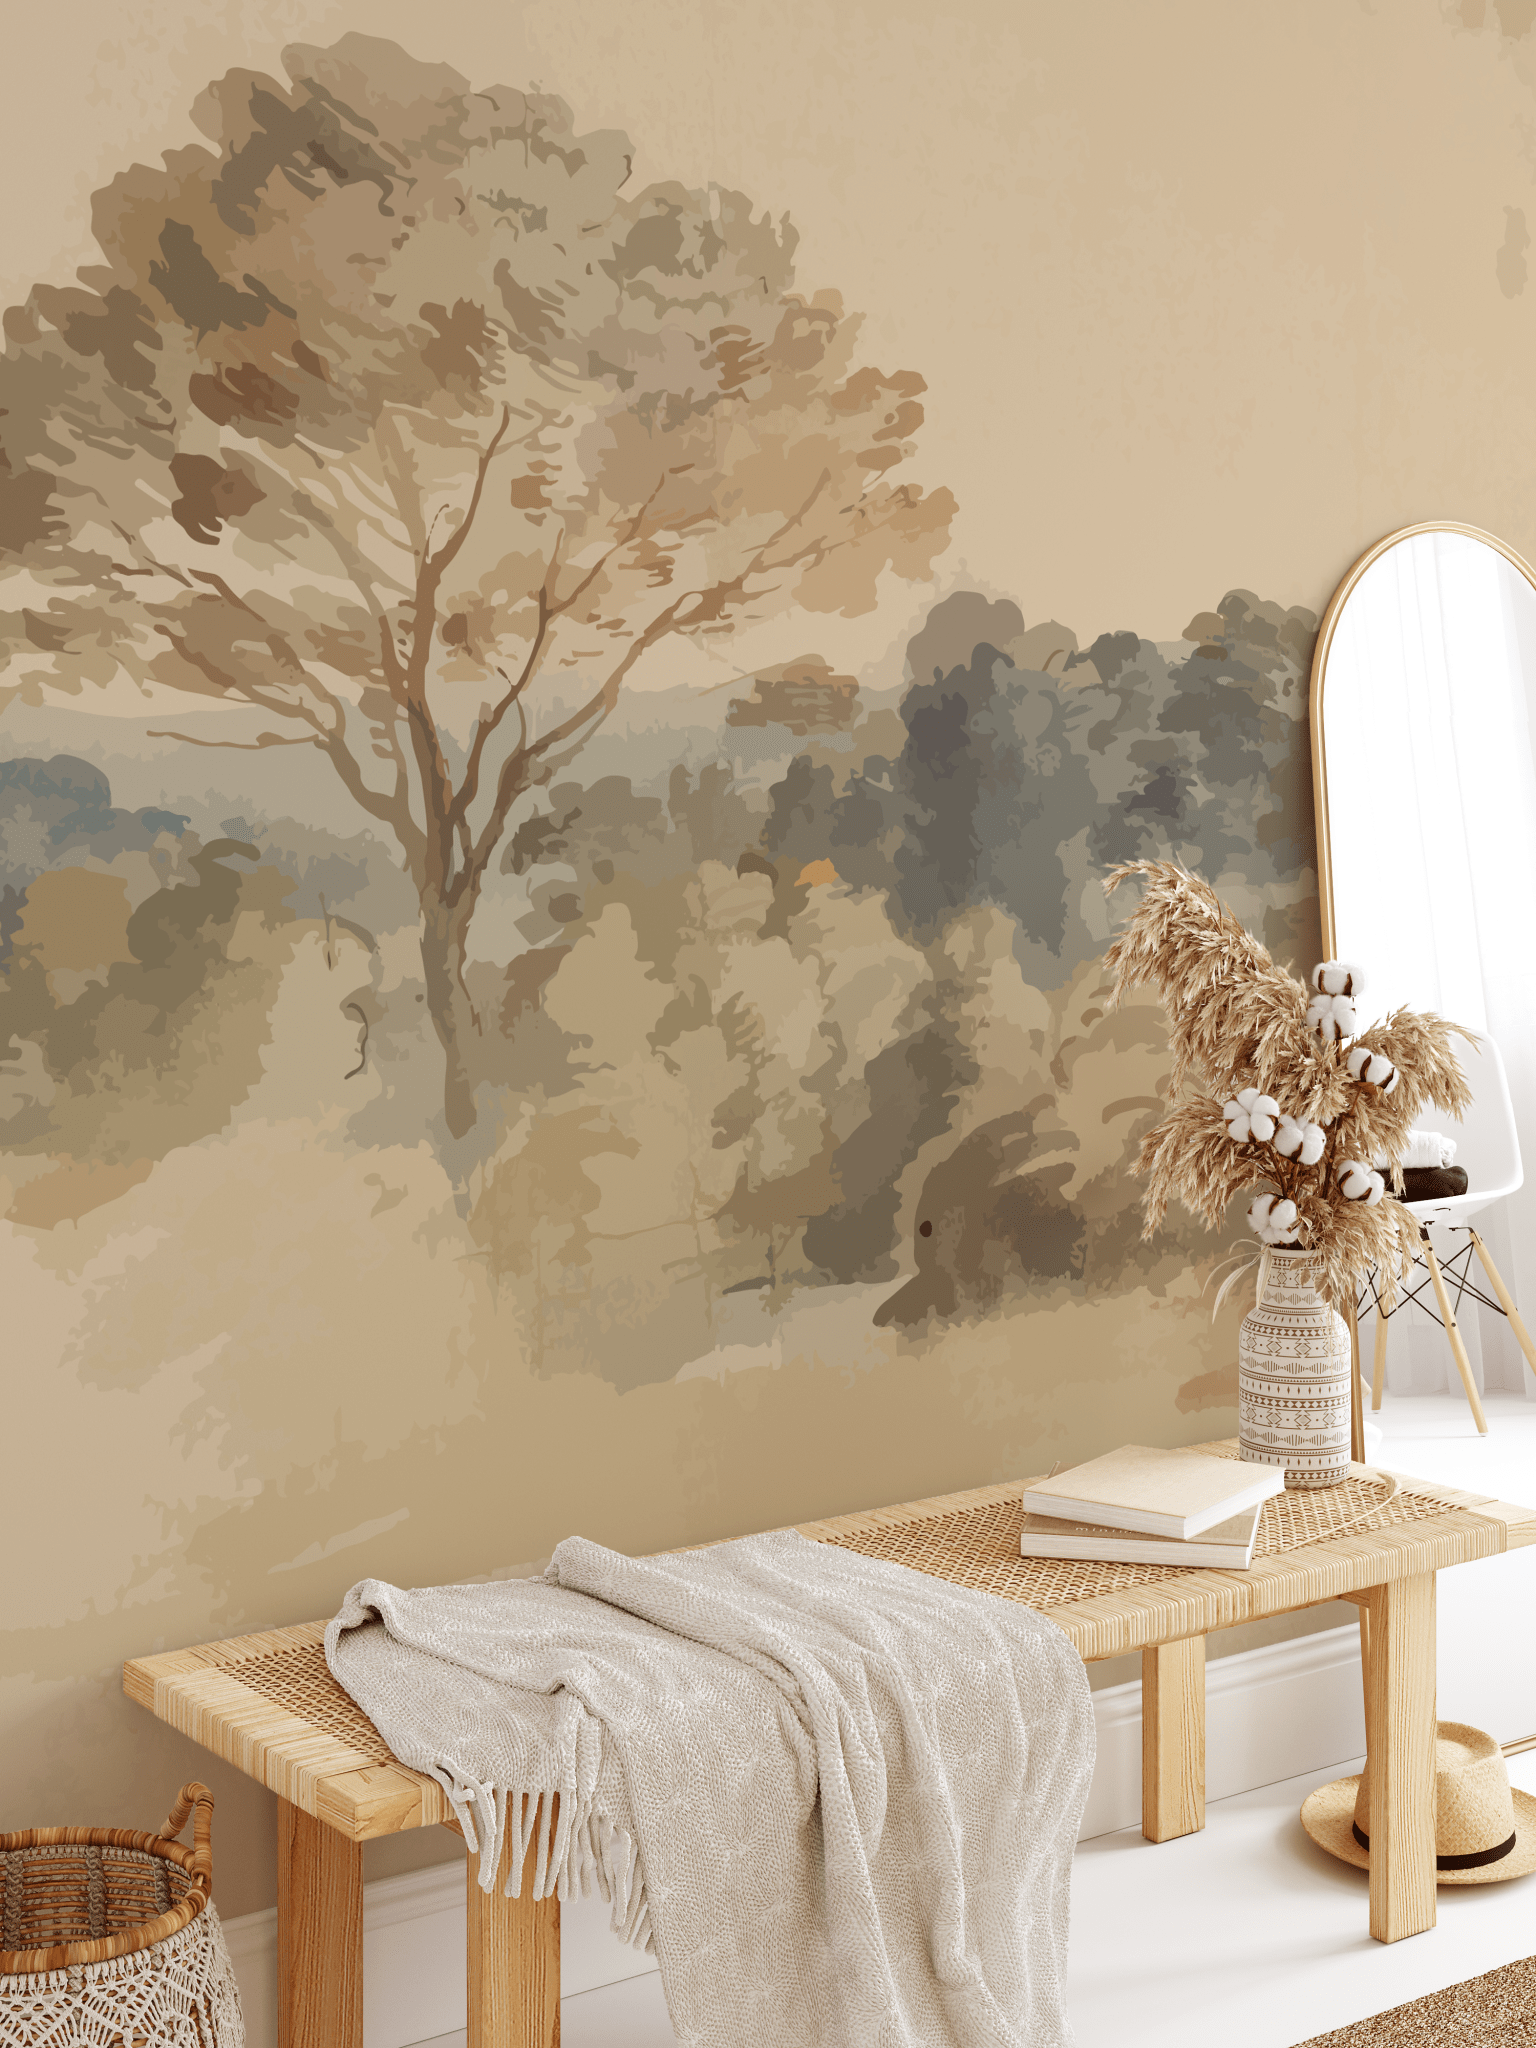 A serene entryway featuring a peel and stick wall mural in a vintage landscape style showcasing a detailed tree. The space is complemented by a wooden bench, a soft throw, a round mirror, and a vase with dried plants.